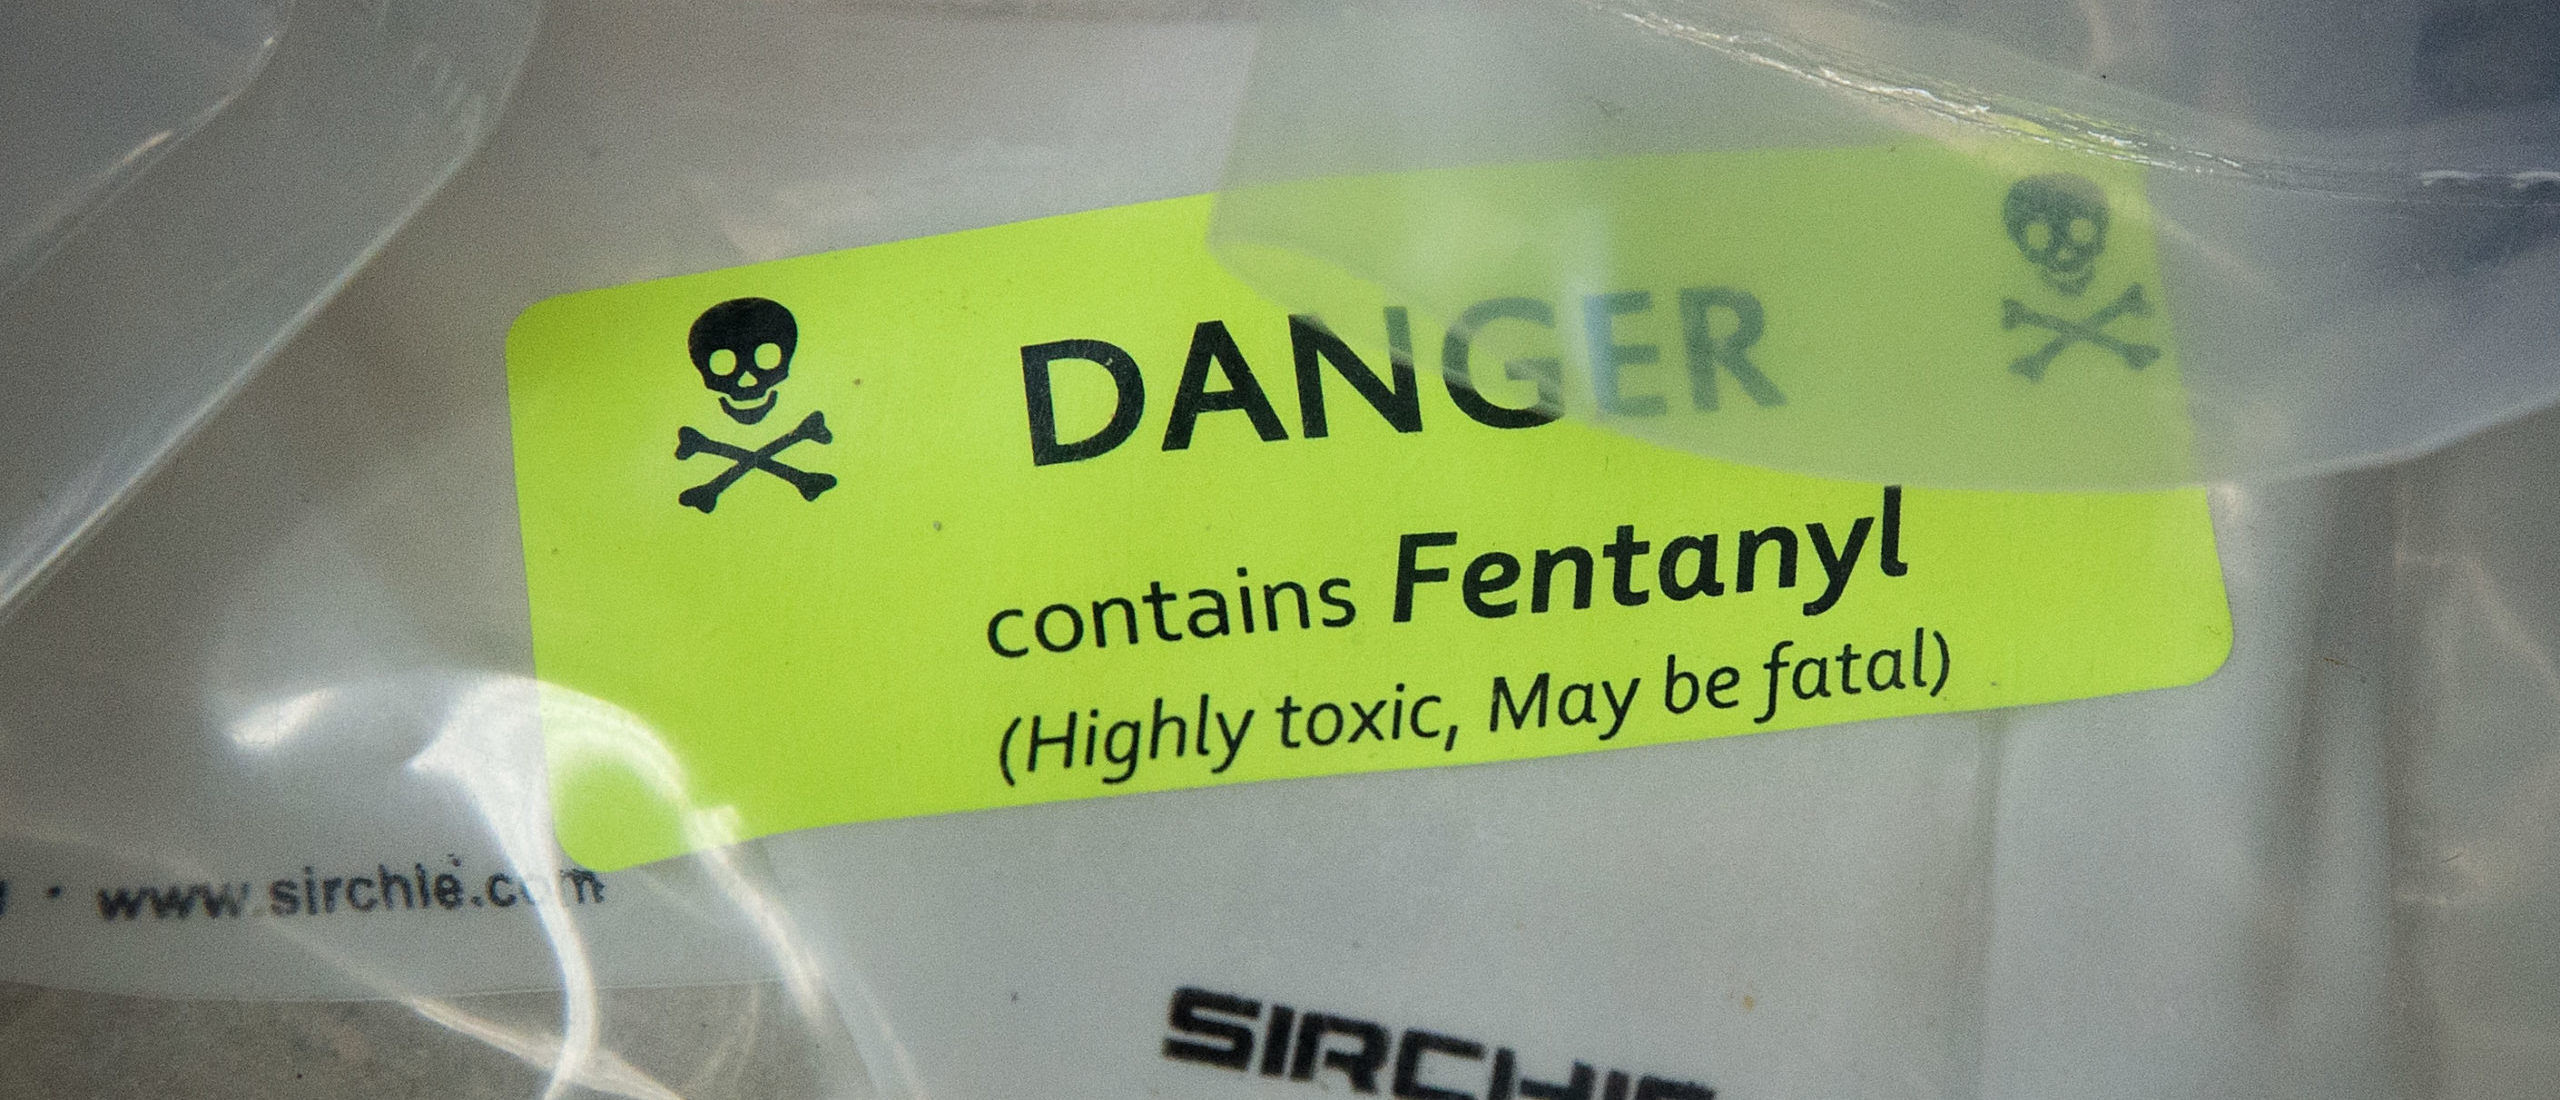 ‘Tragic’: Border Officers Catch Several Female American Citizens Storing Nearly A Pound Of Fentanyl In Their Bodies